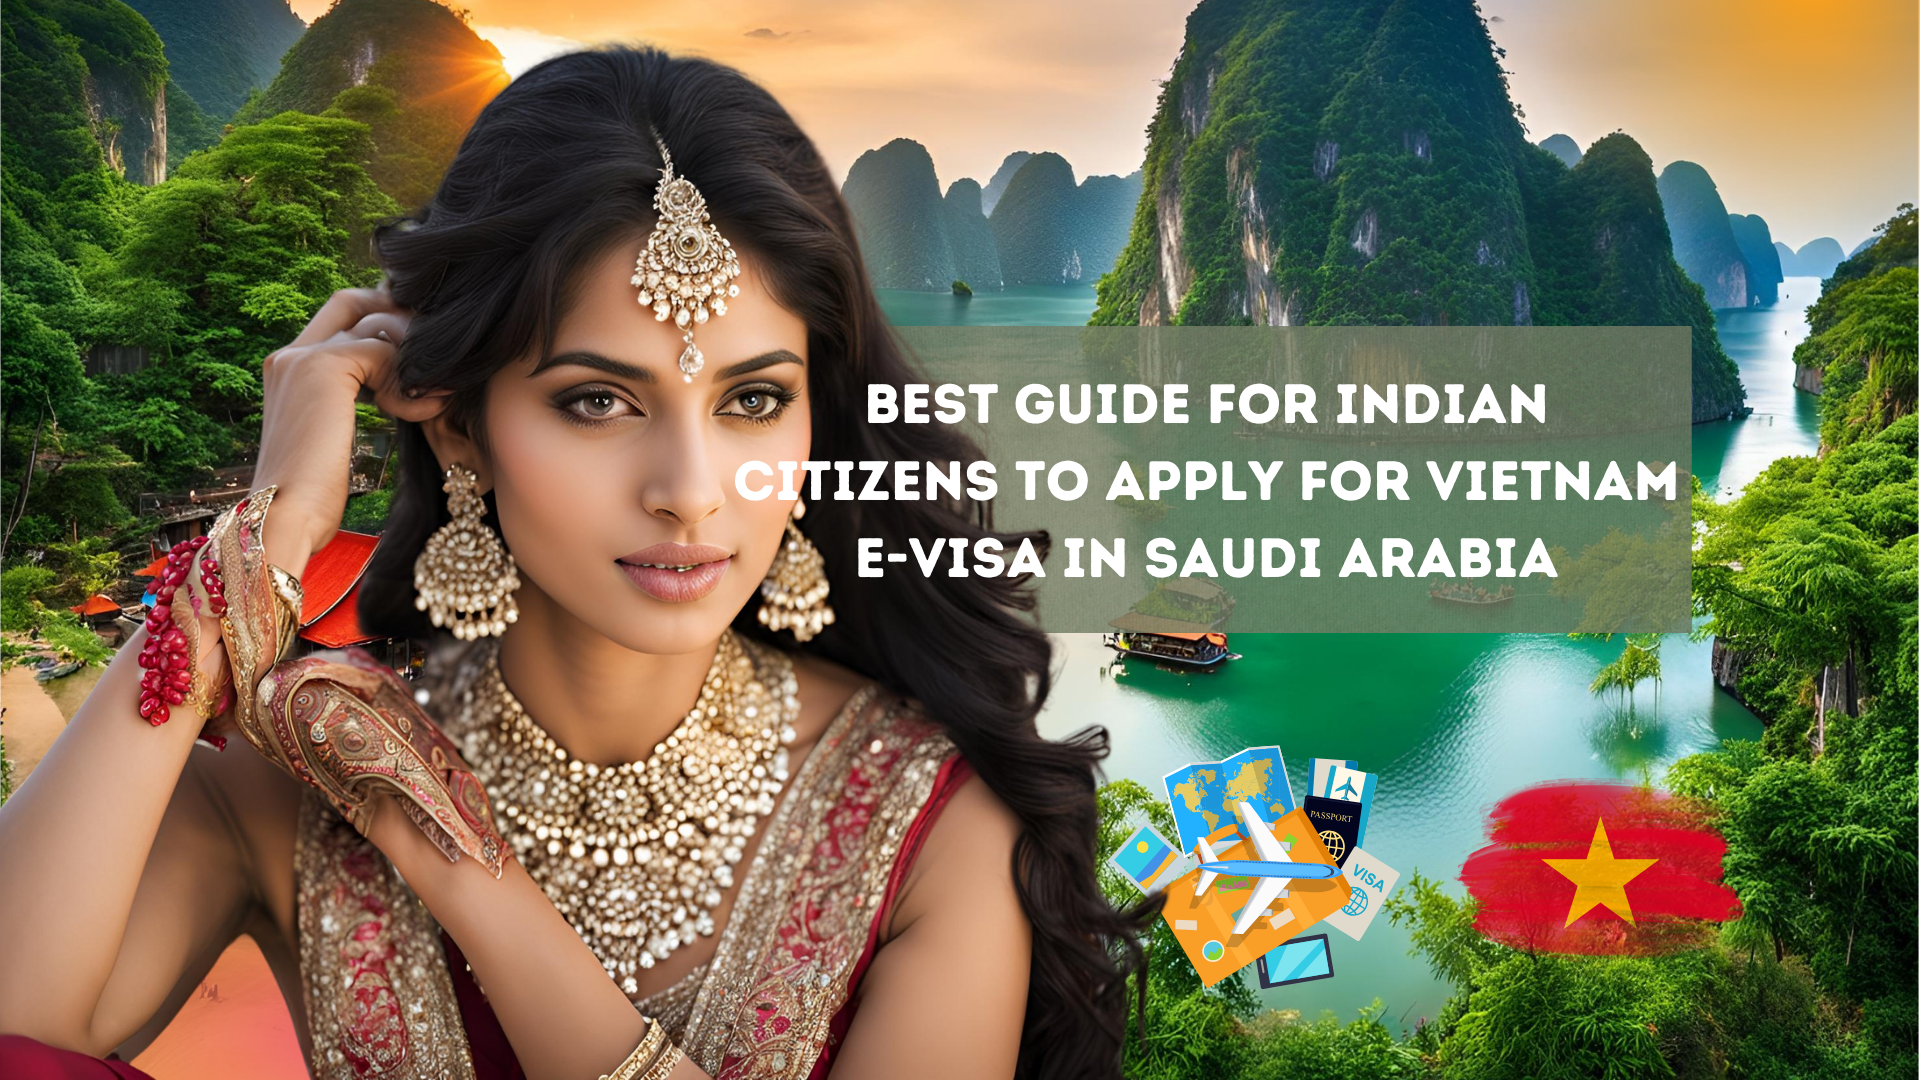 Best Guide for Indian Citizens to Apply for Vietnam E-Visa in Saudi Arabia